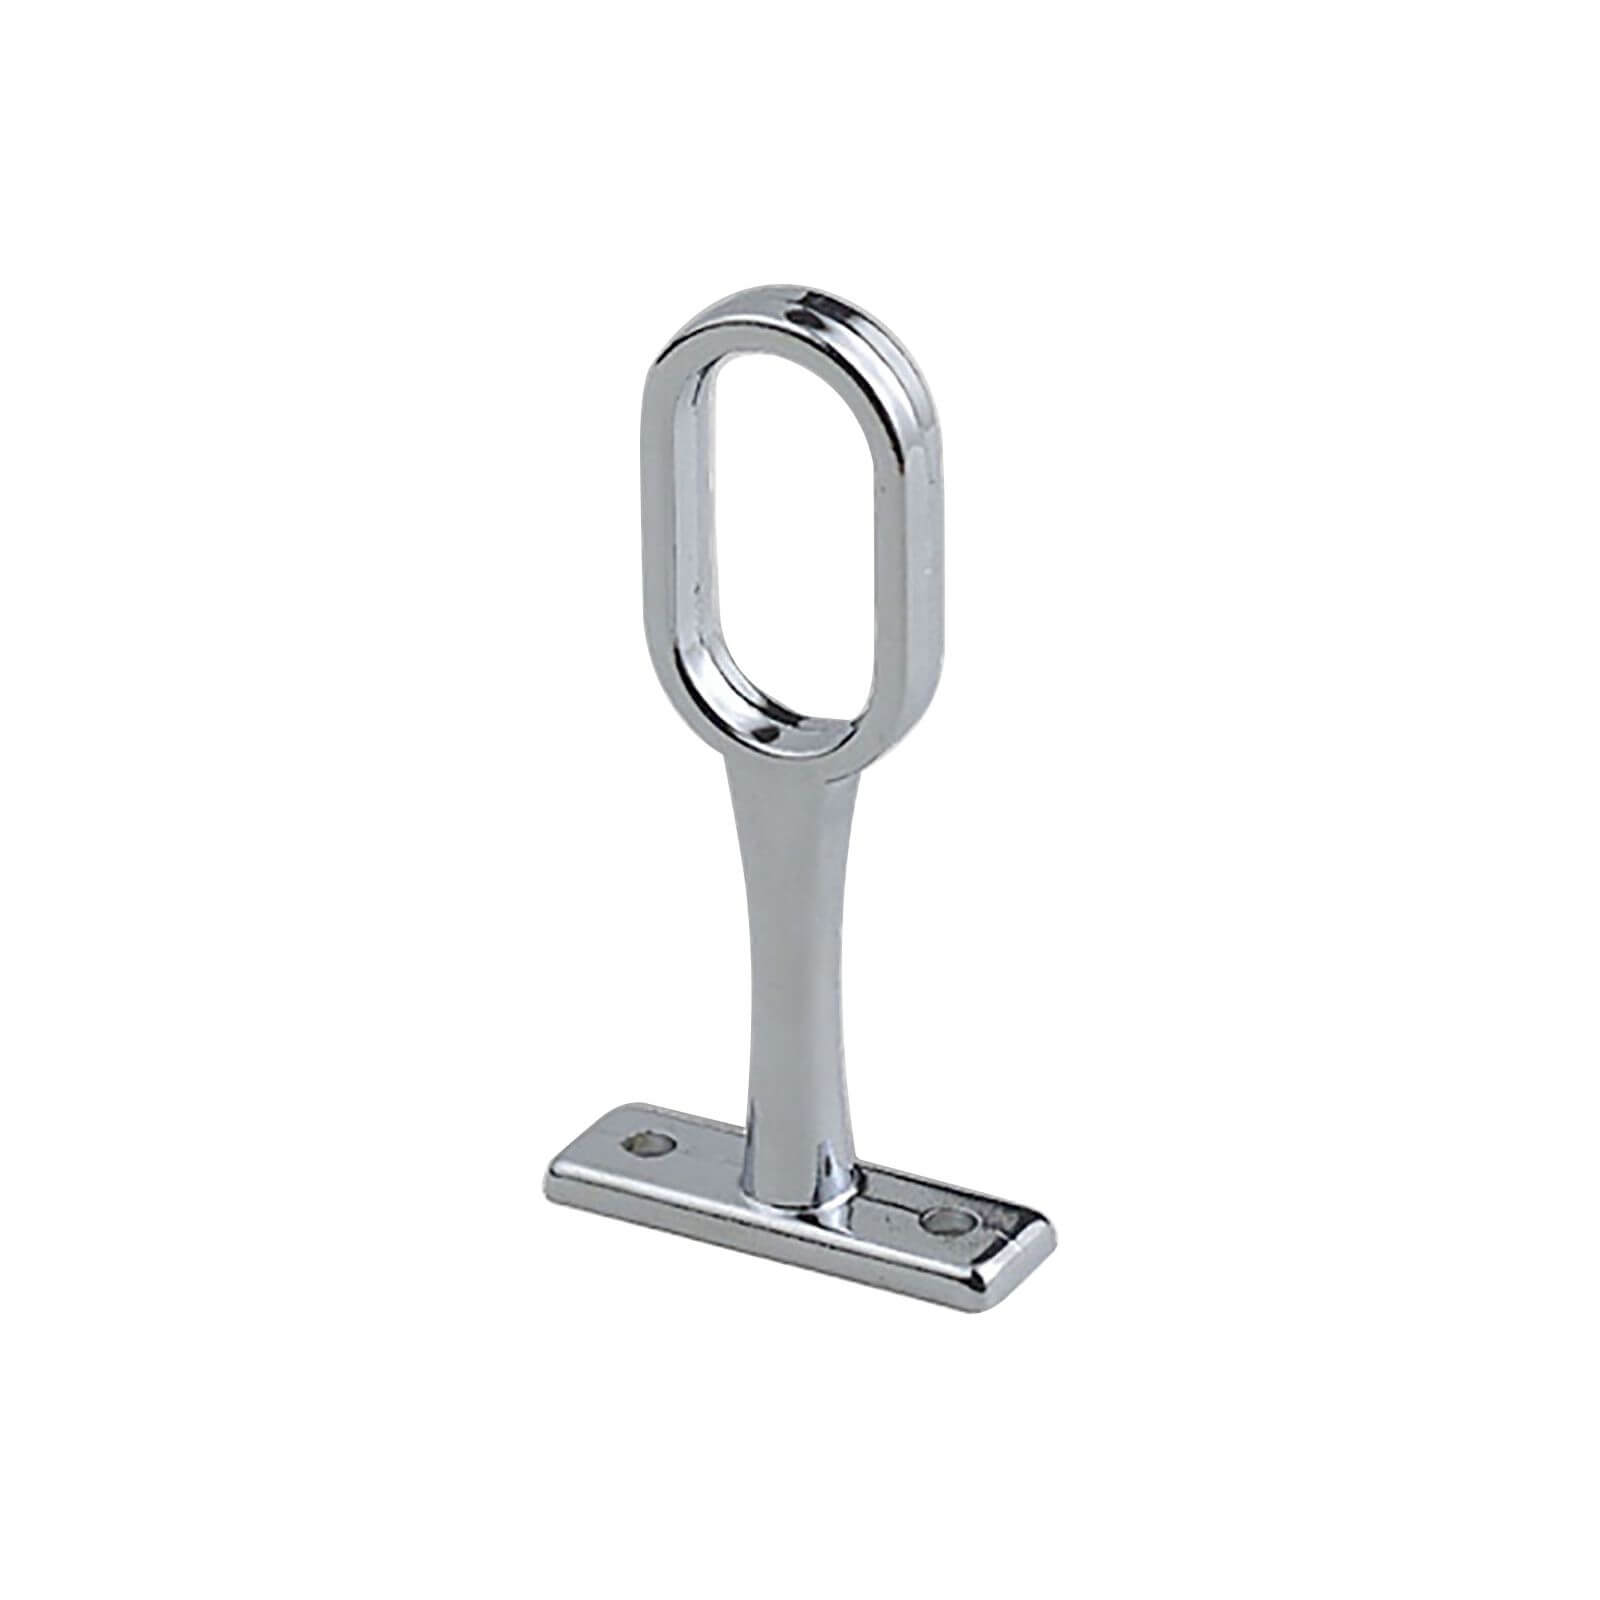 Oval Support Bracket Chrome Plated